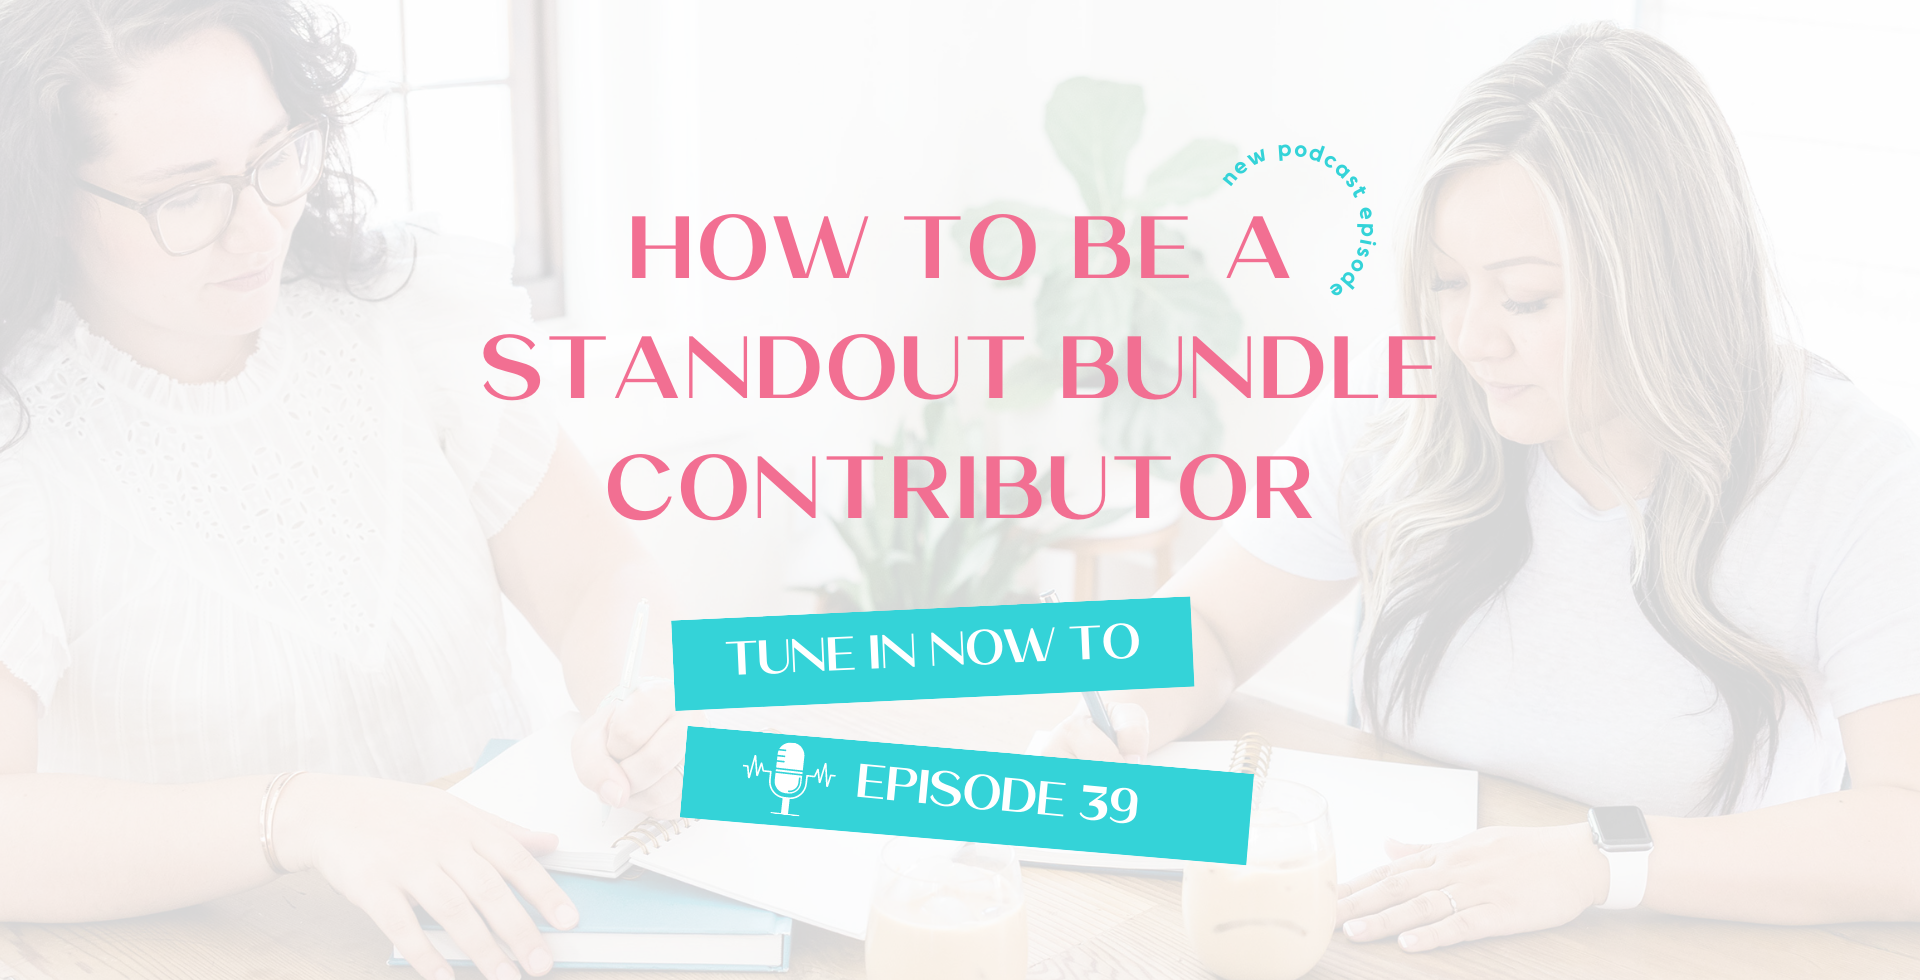 How to Be a Standout Bundle Contributor - Episode 39